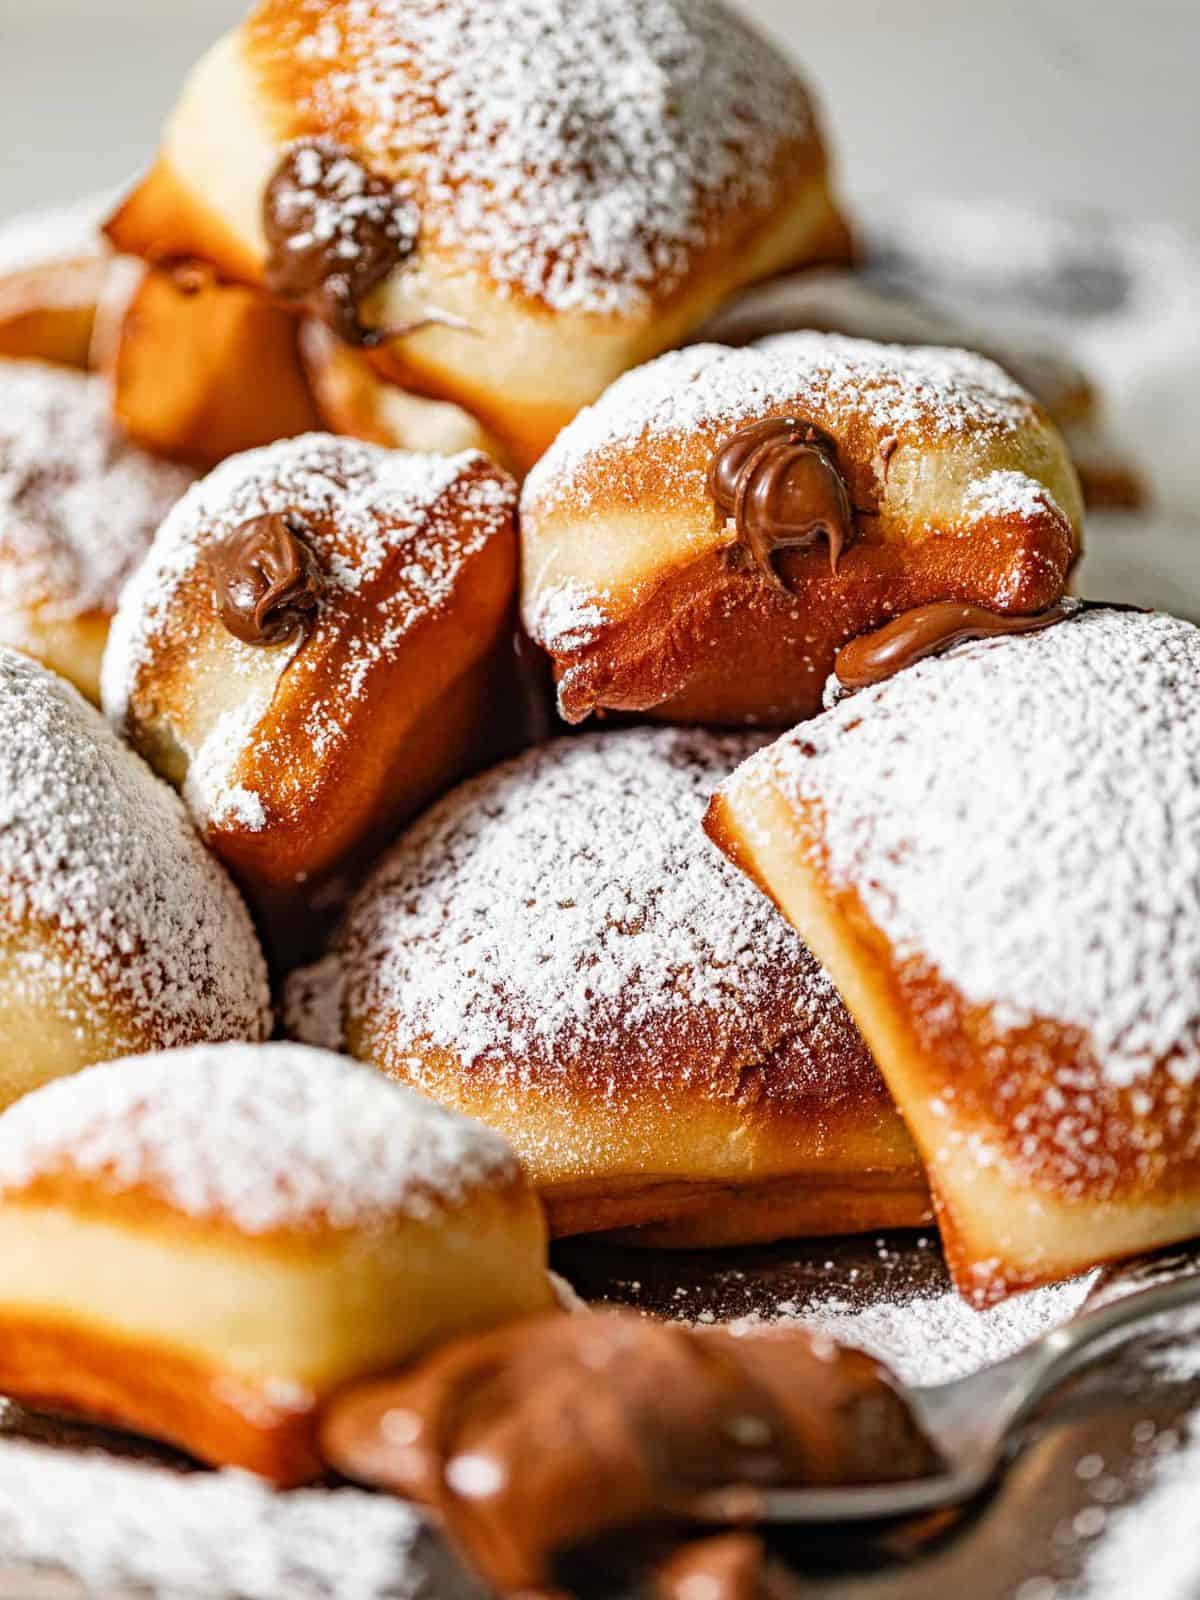 sugary sweet fried pieces of beignets stuffed with creamy Nutella.